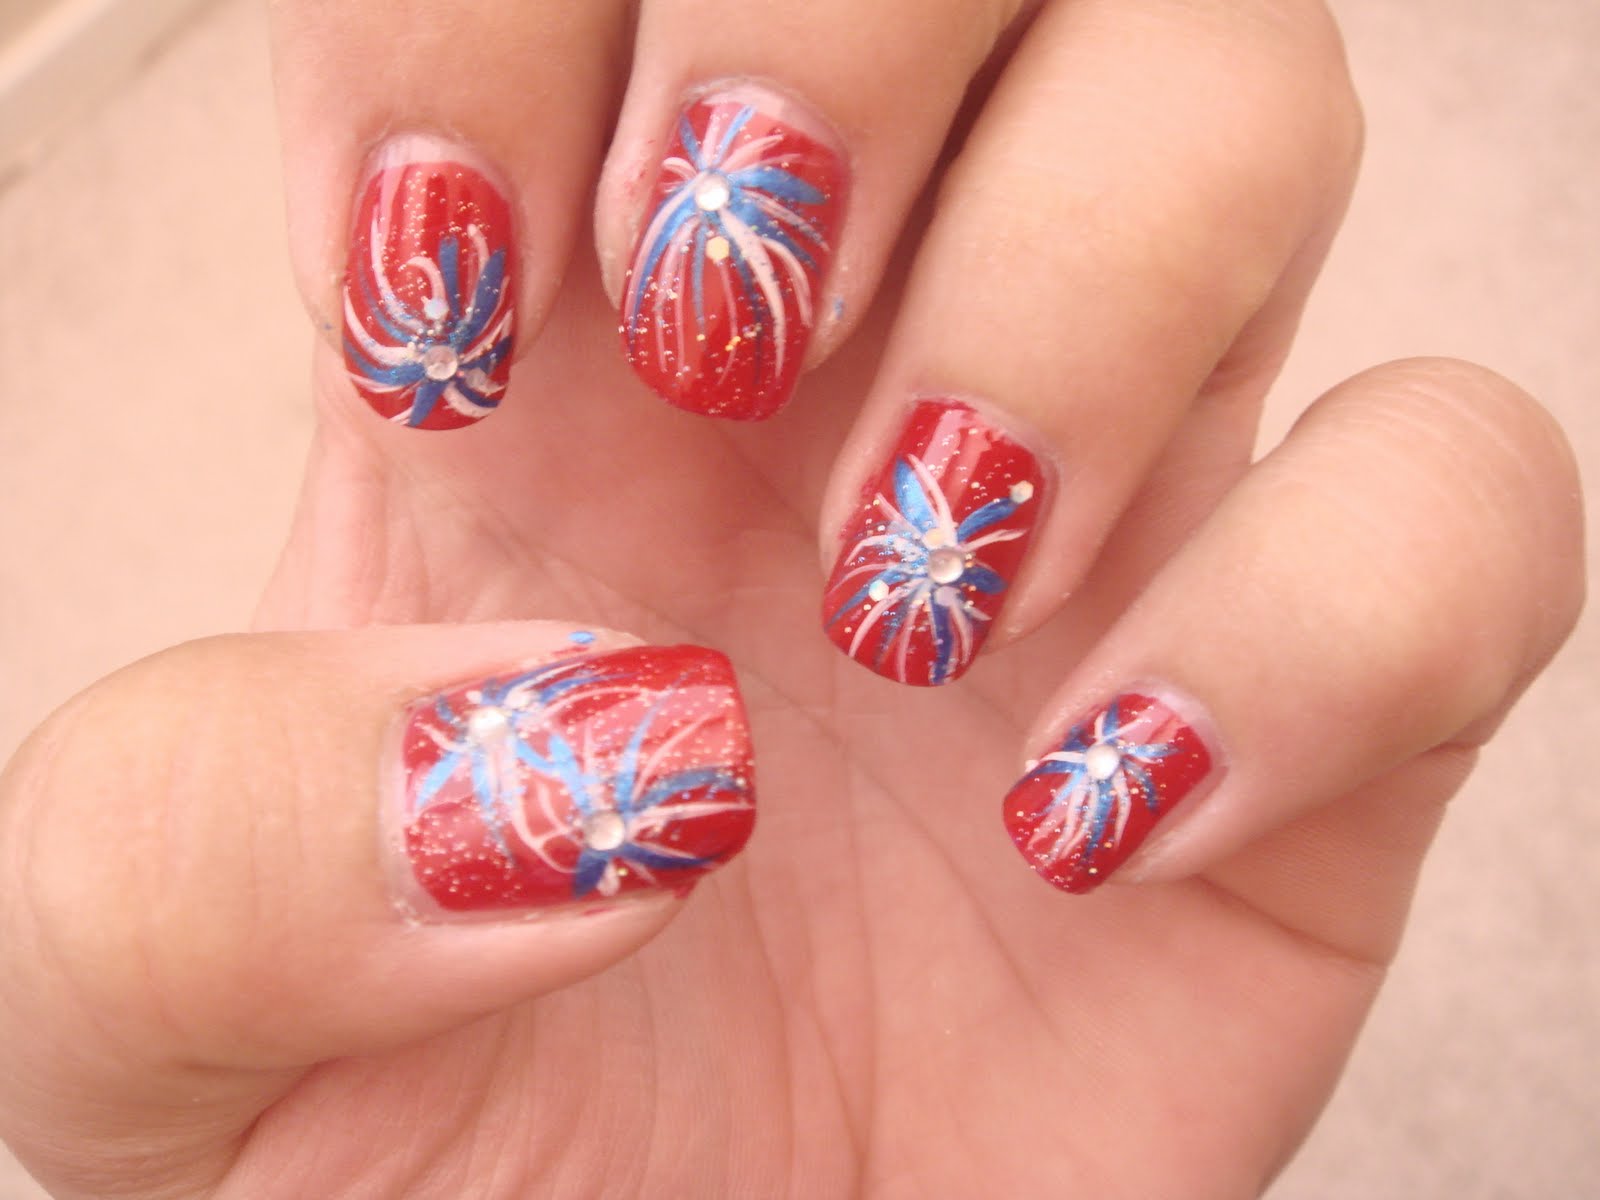 4. American Flag Toe Nail Design for the 4th of July - wide 7